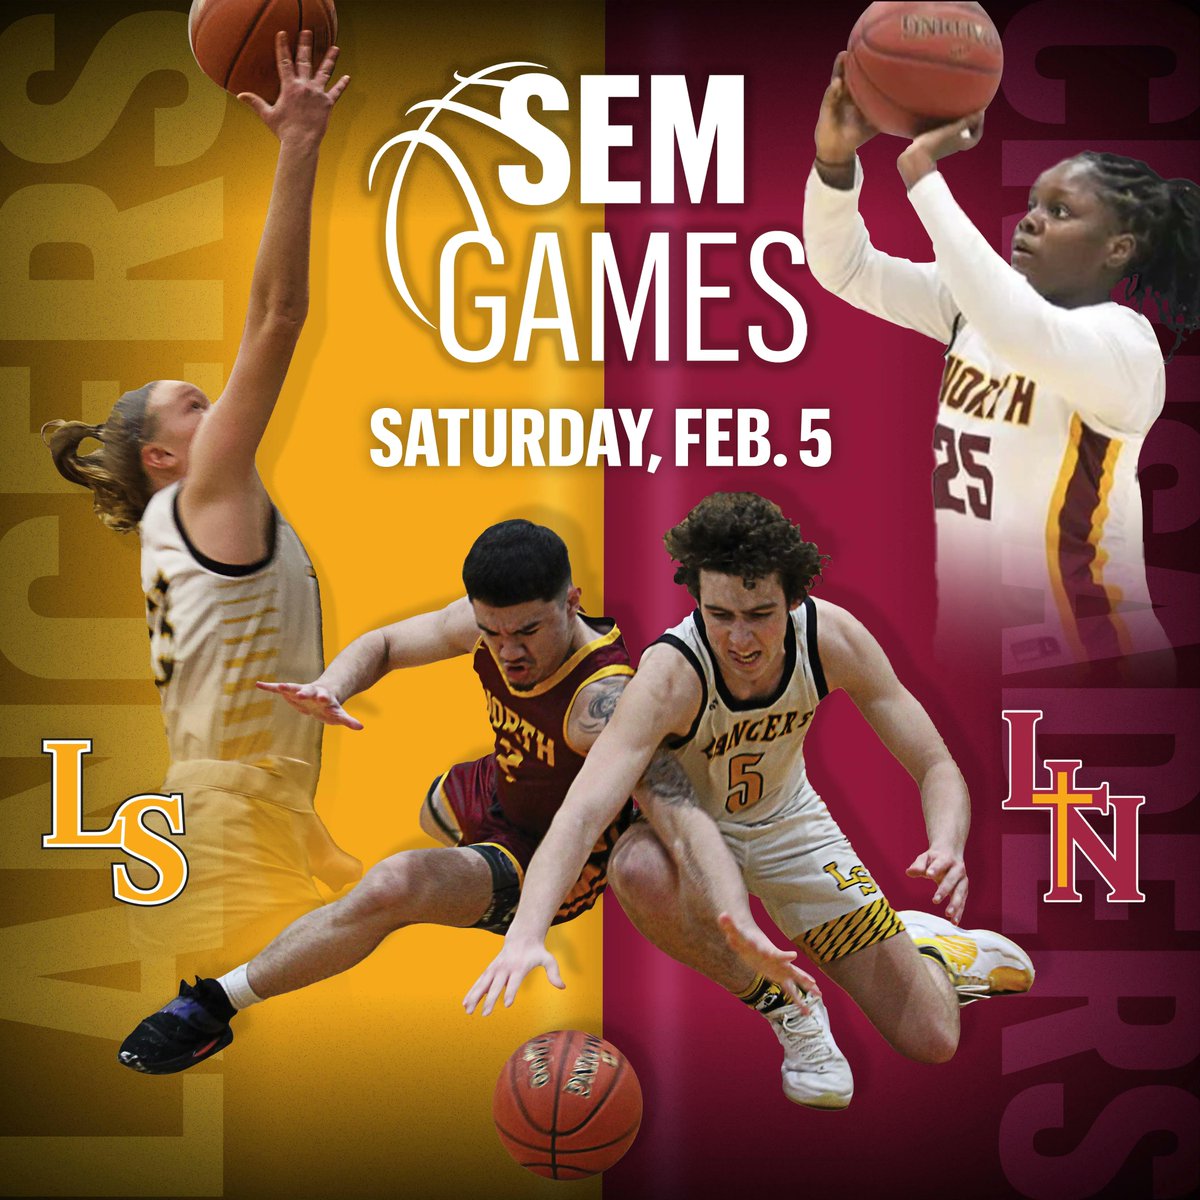 Get ready for the Sem Games! Due to COVID protocol, only two fans will be allowed per player into the games at Lutheran North. You can watch a livestream, complete with audio and play-by-play commentary, as the Crusaders battle the Lancers on Saturday, February 5. https://t.co/kI7JGTnBmx